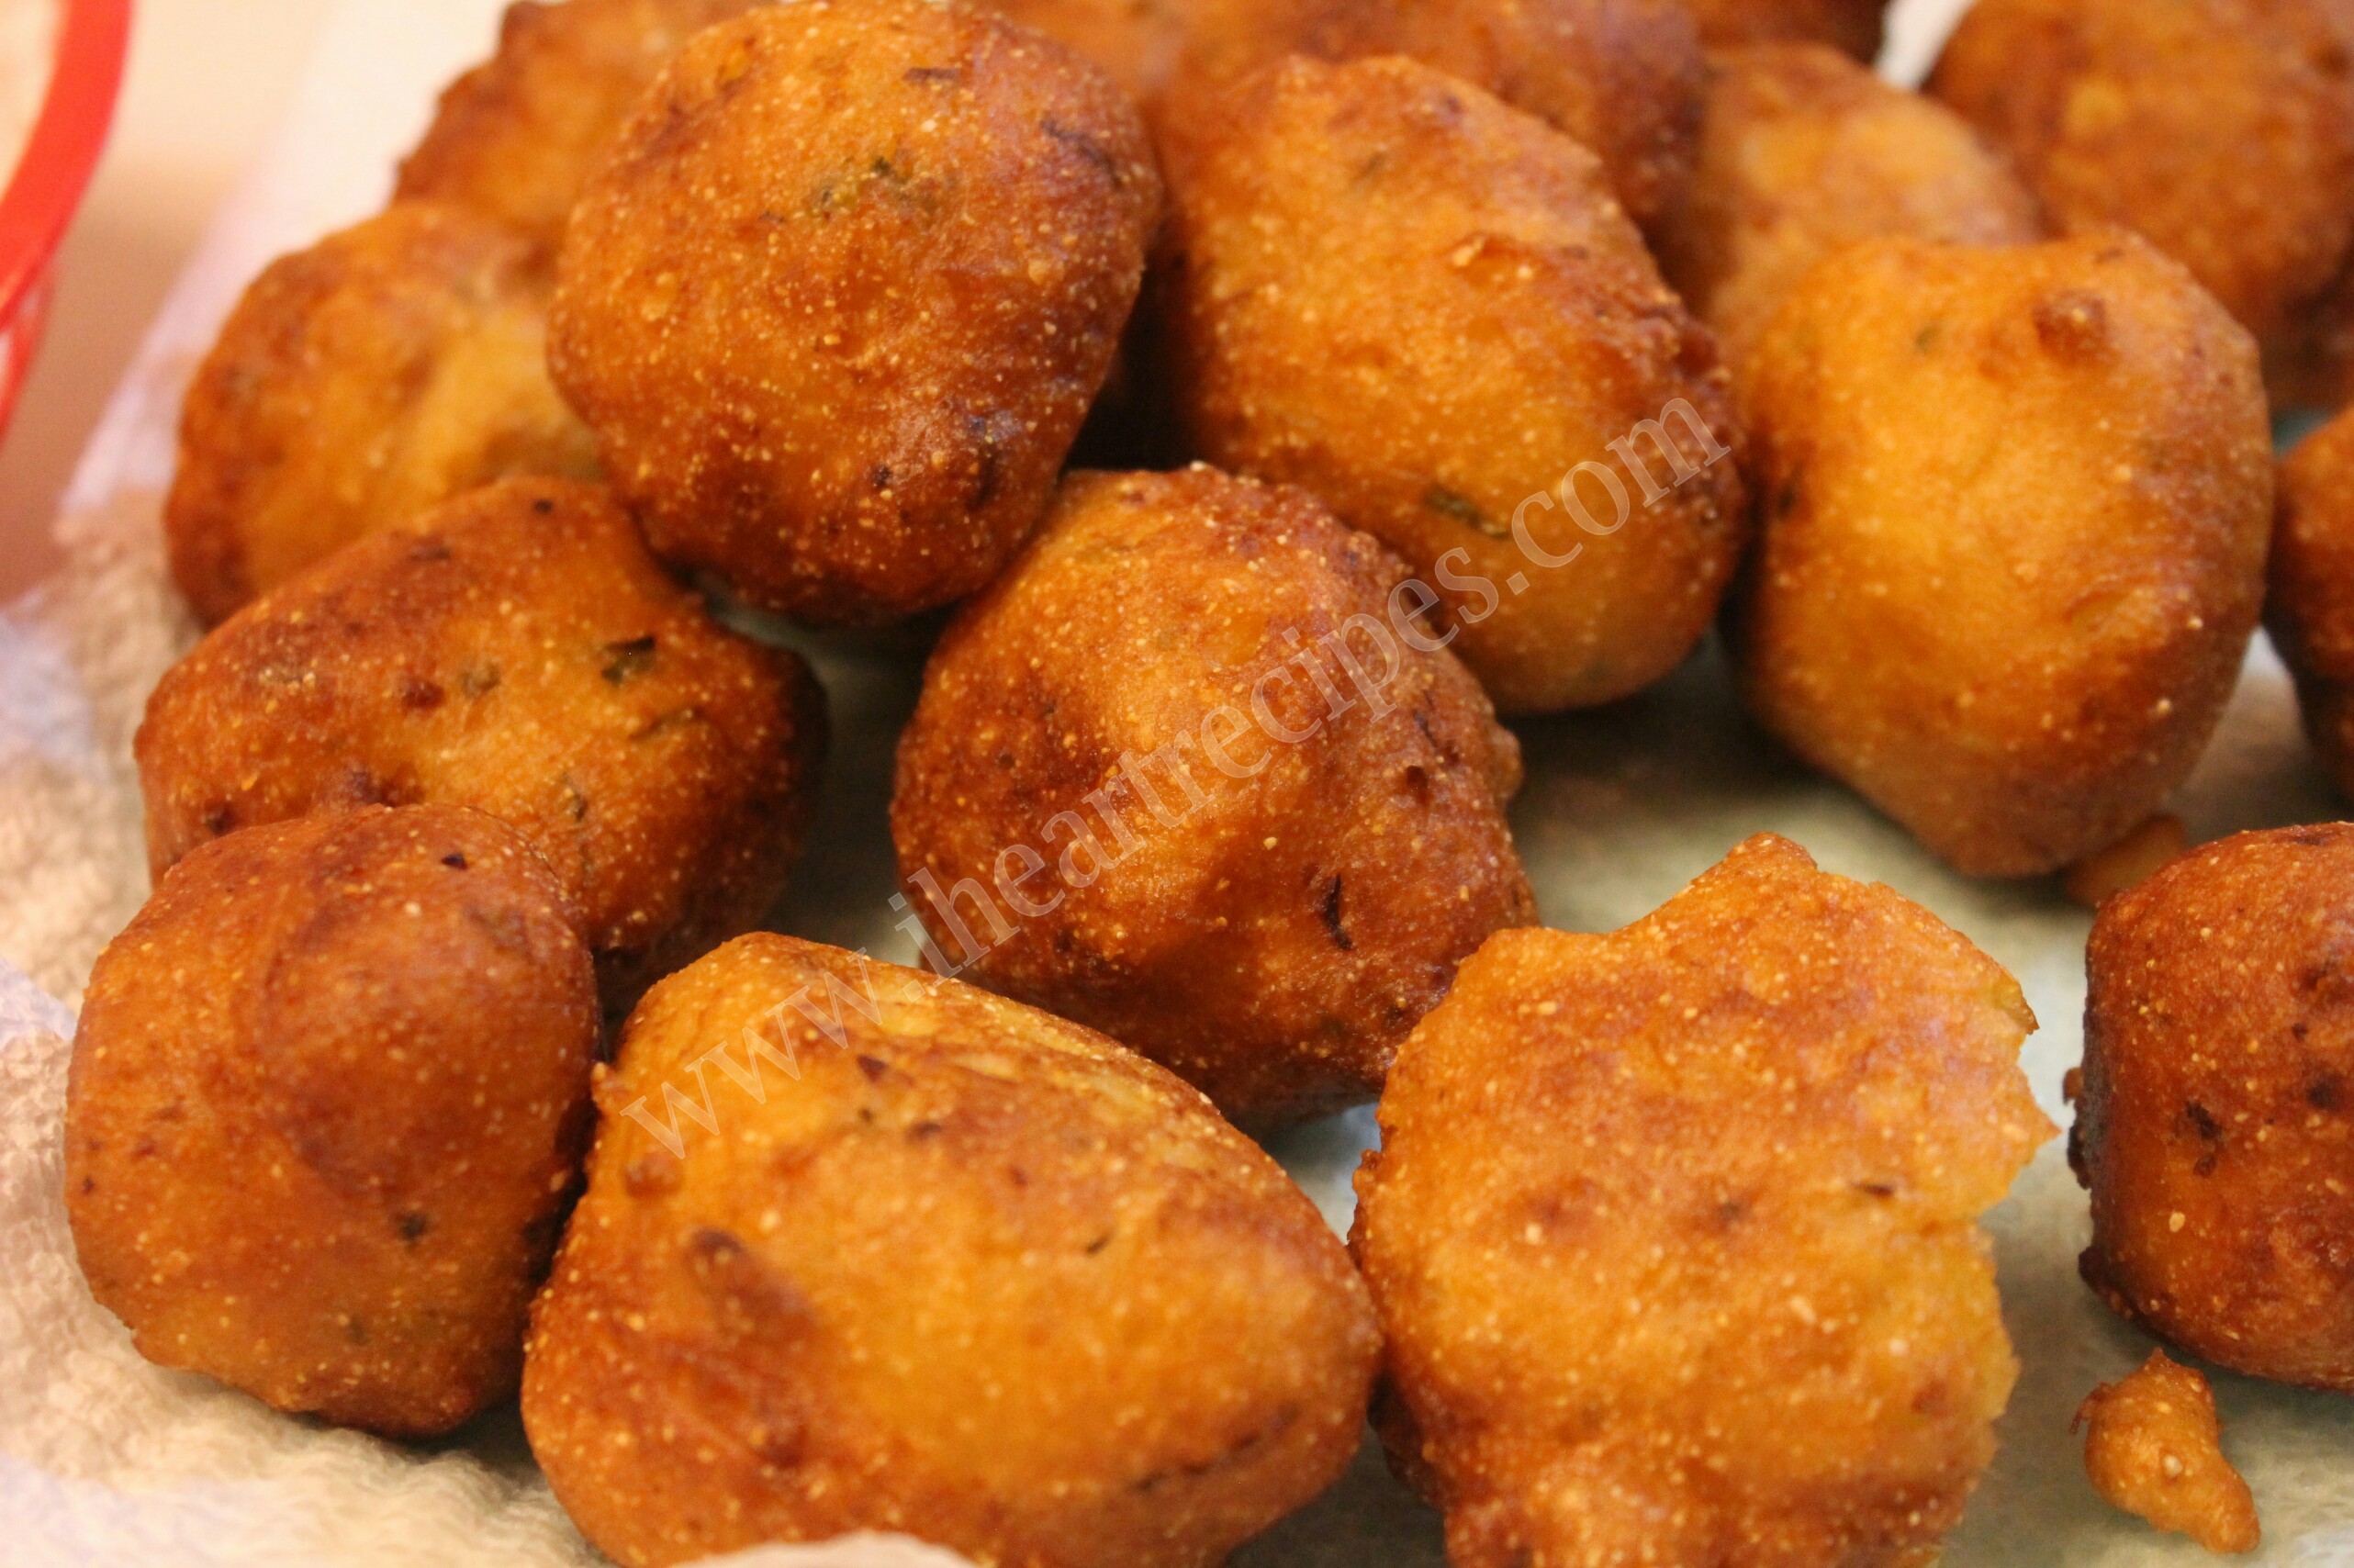 A close-up image of golden-brown deep-fried hush puppies sitting on a paper towel-lined plate.